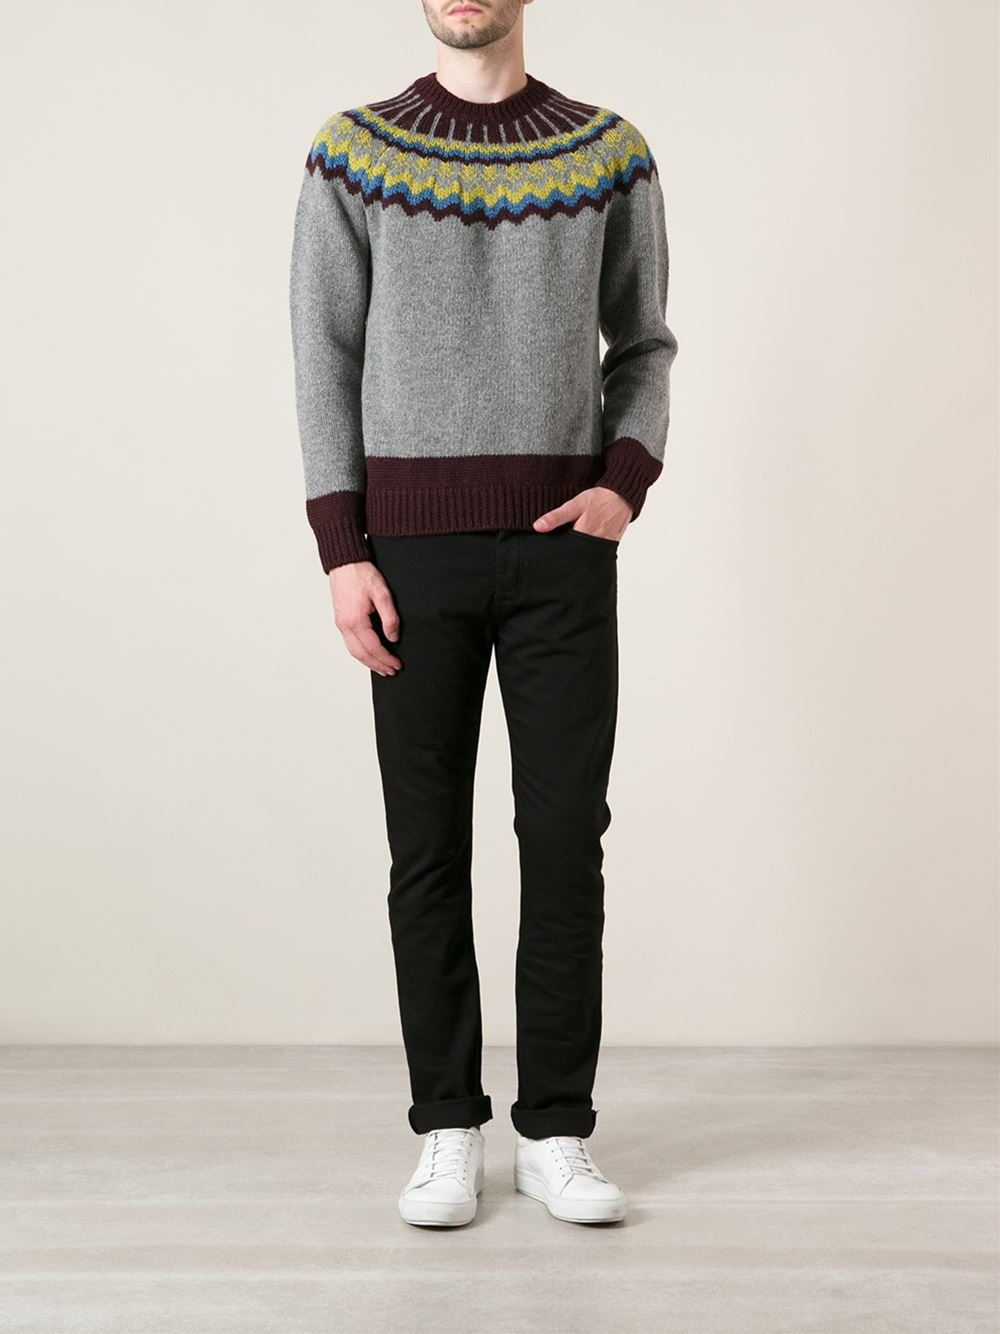 Lyst - Valentino Patterned Sweater in Gray for Men